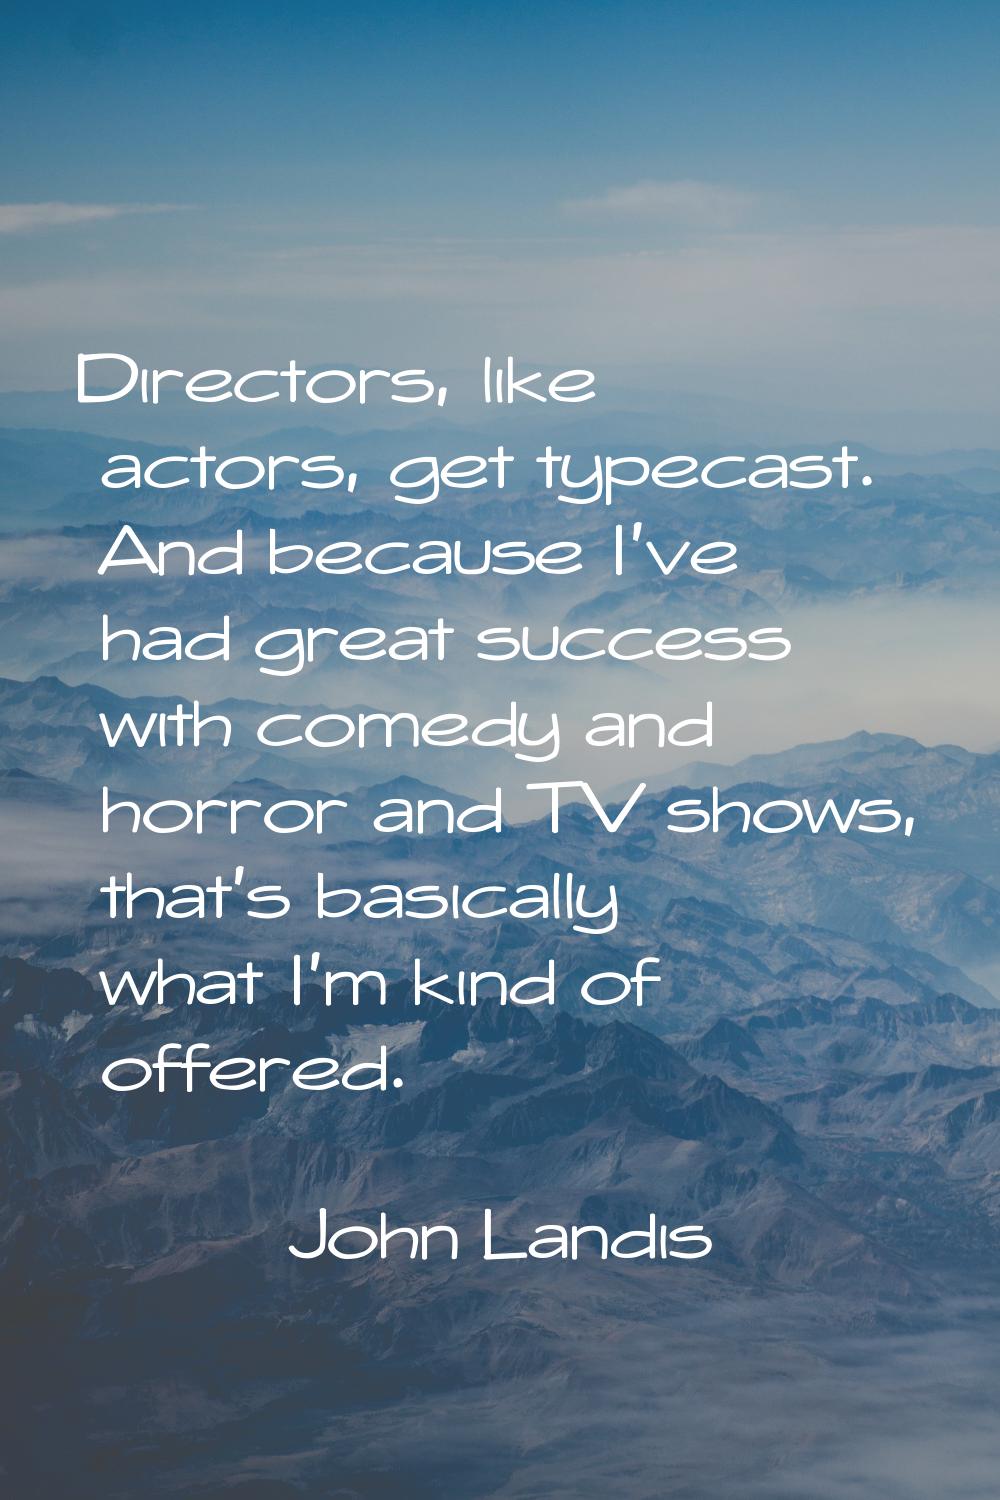 Directors, like actors, get typecast. And because I've had great success with comedy and horror and